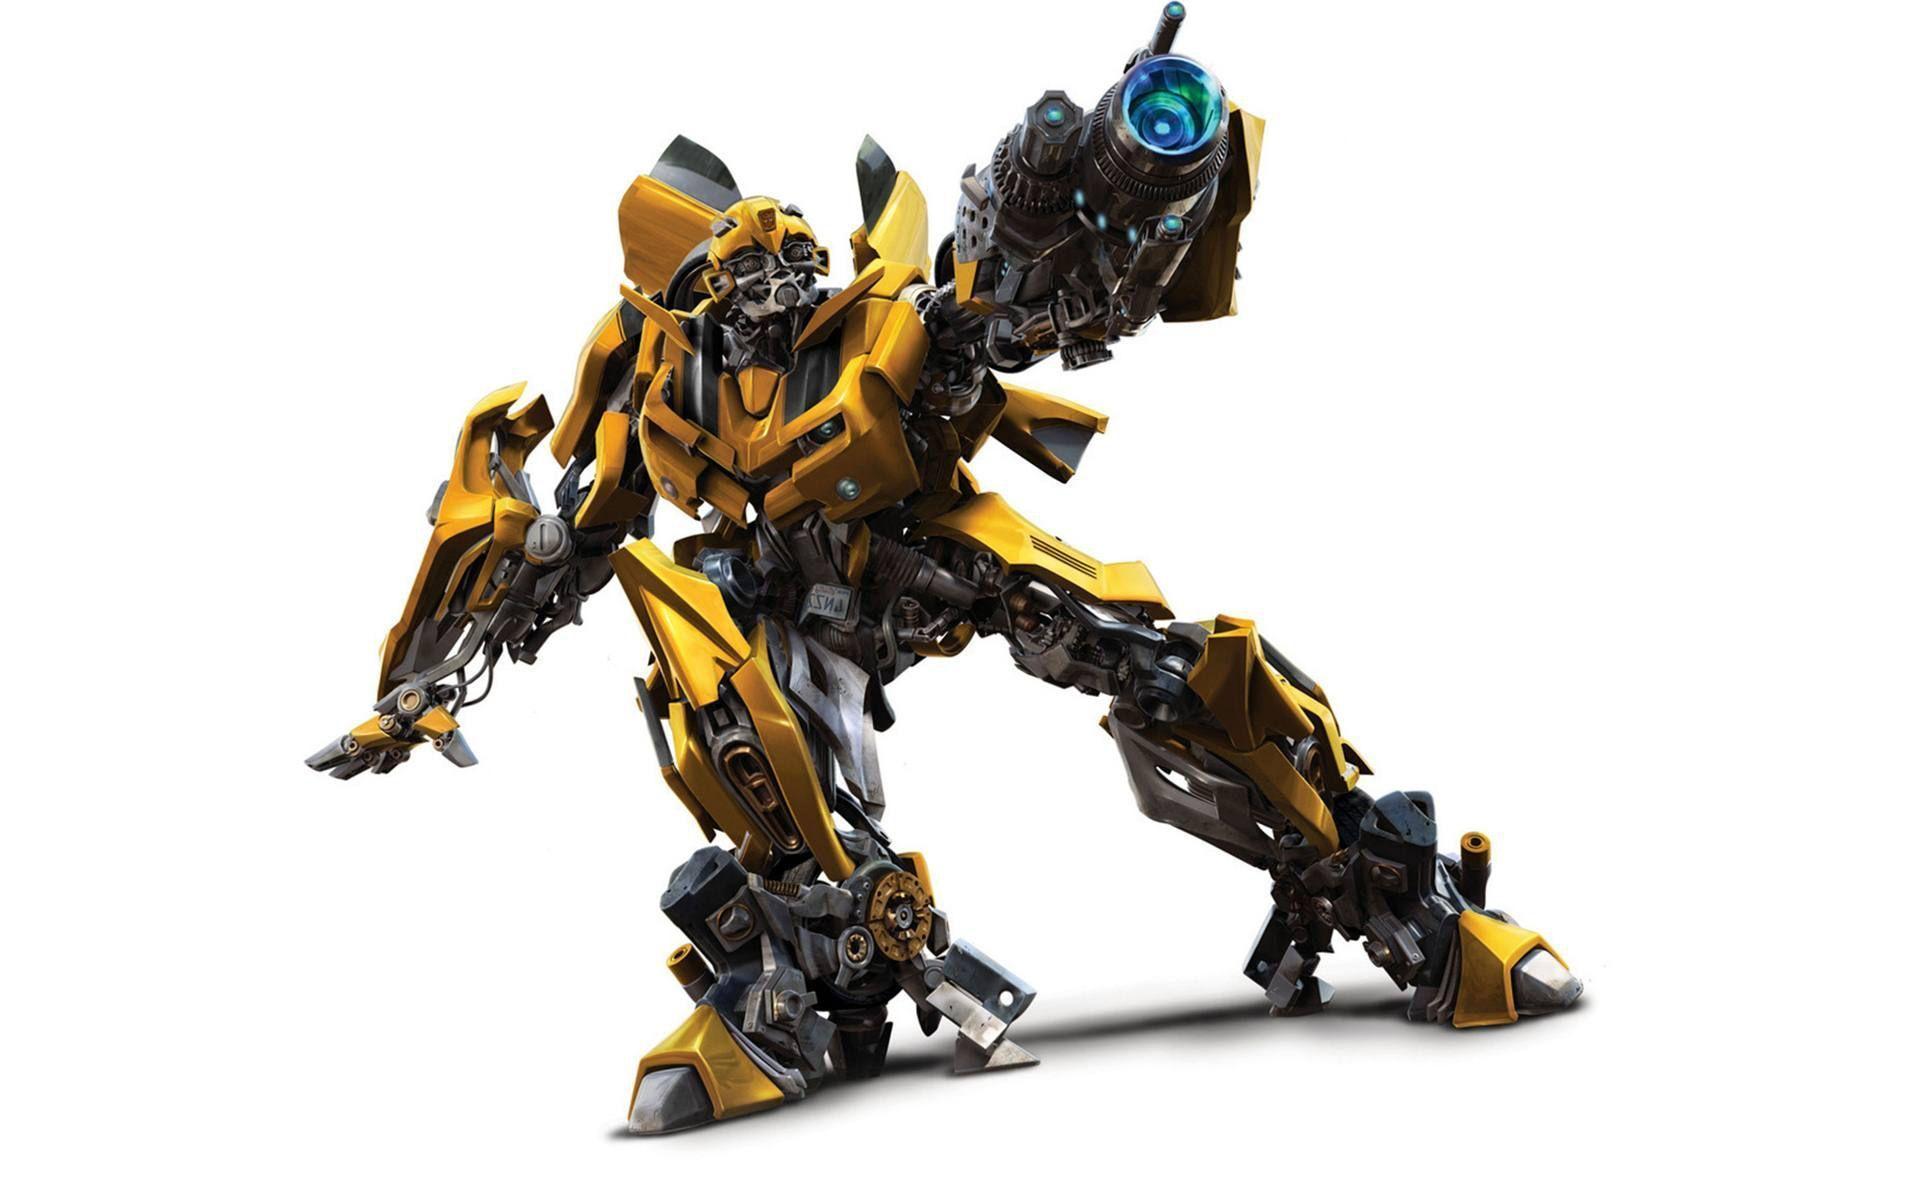 Bumblebee Transformers Wallpaper. Download High Quality